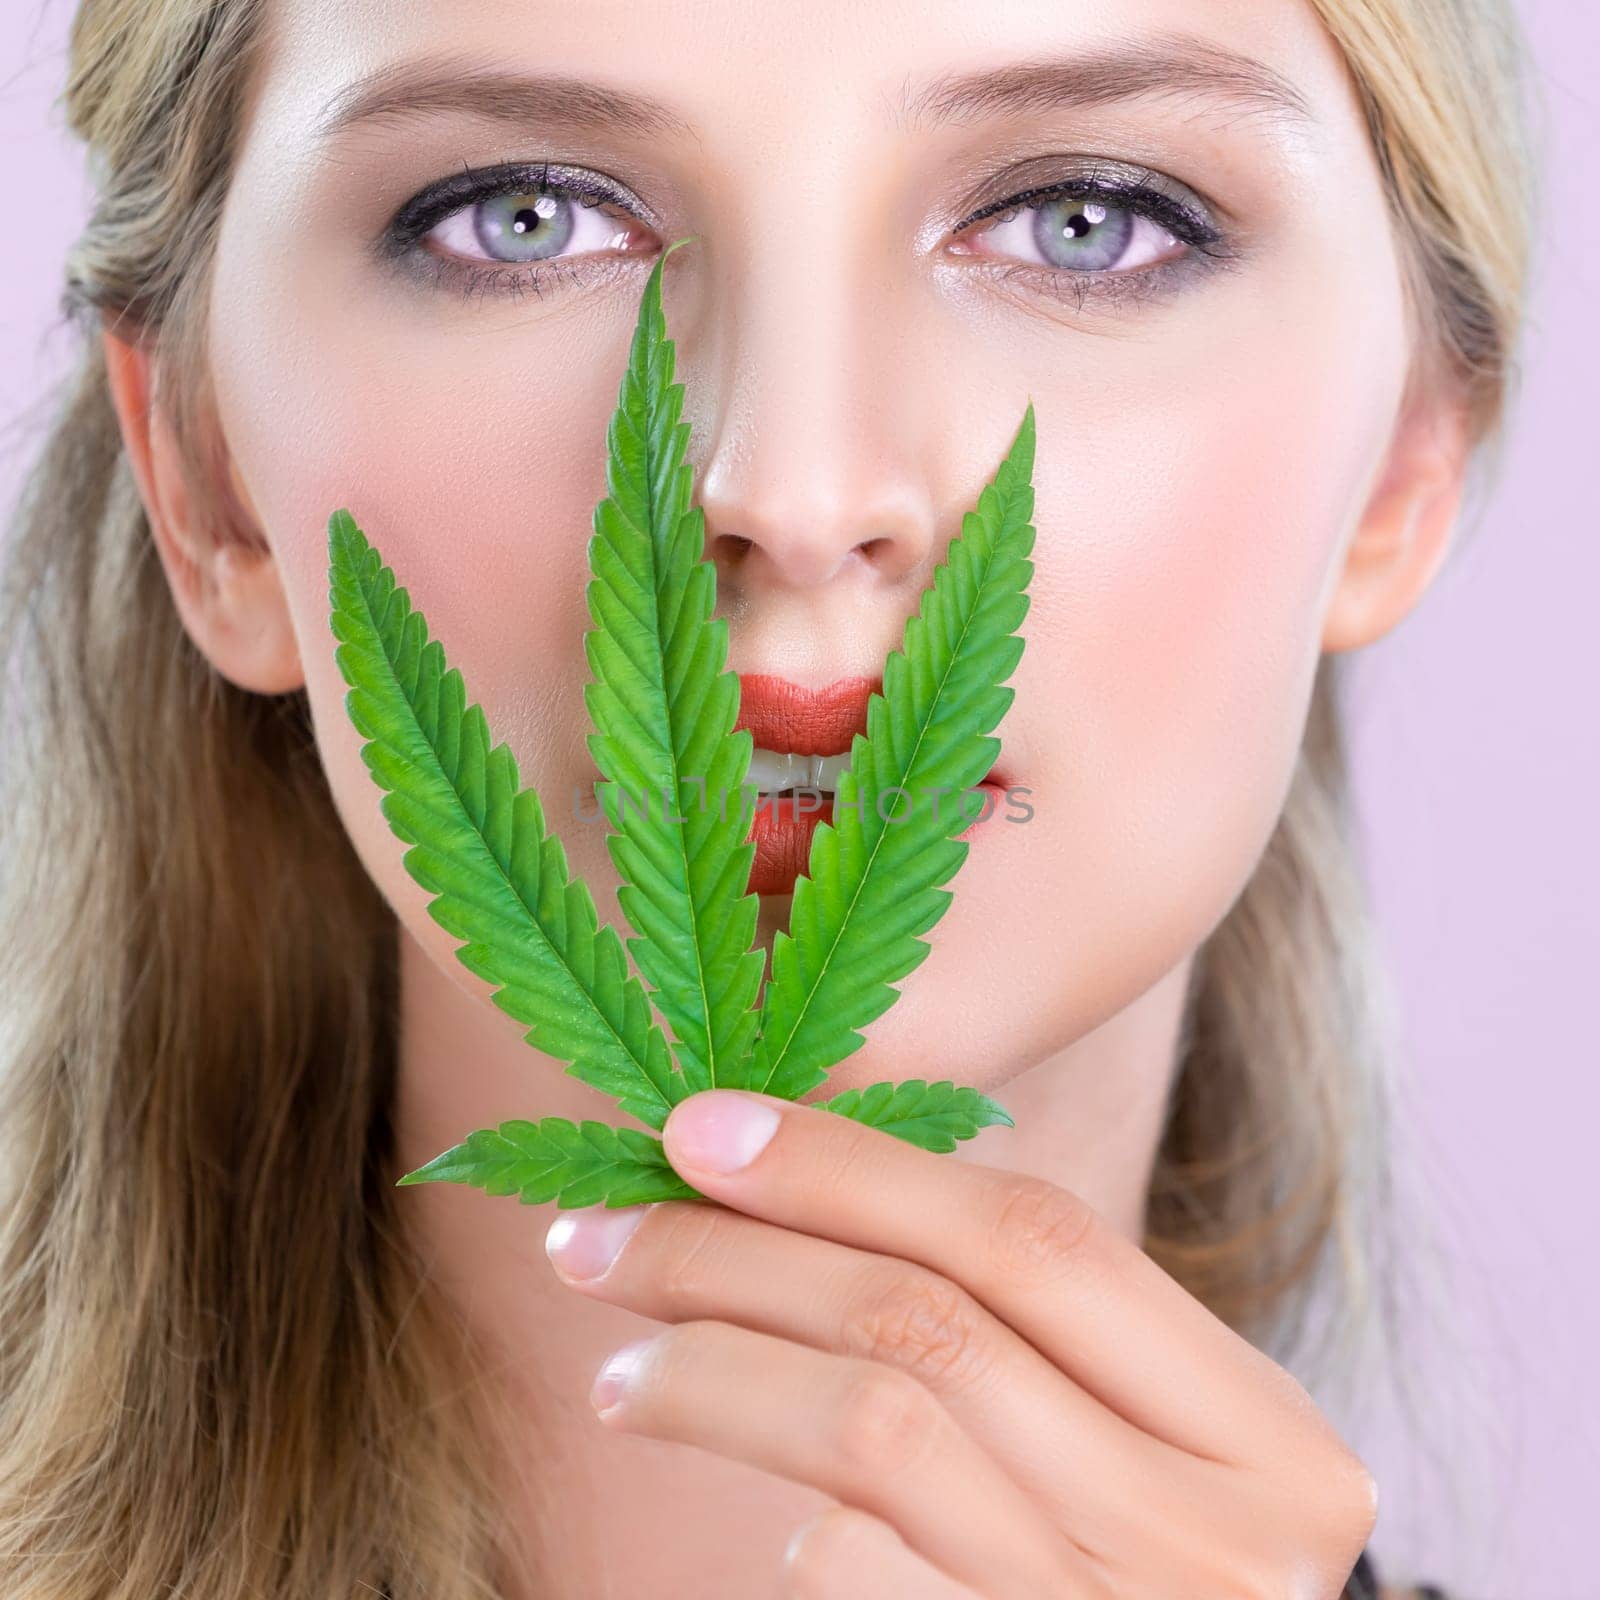 Closeup alluring beautiful woman portrait with perfect makeup lip stick, eyeshadow hold green leaf as concept for cannabis skincare cosmetic product for skin freshness treatment in isolated background